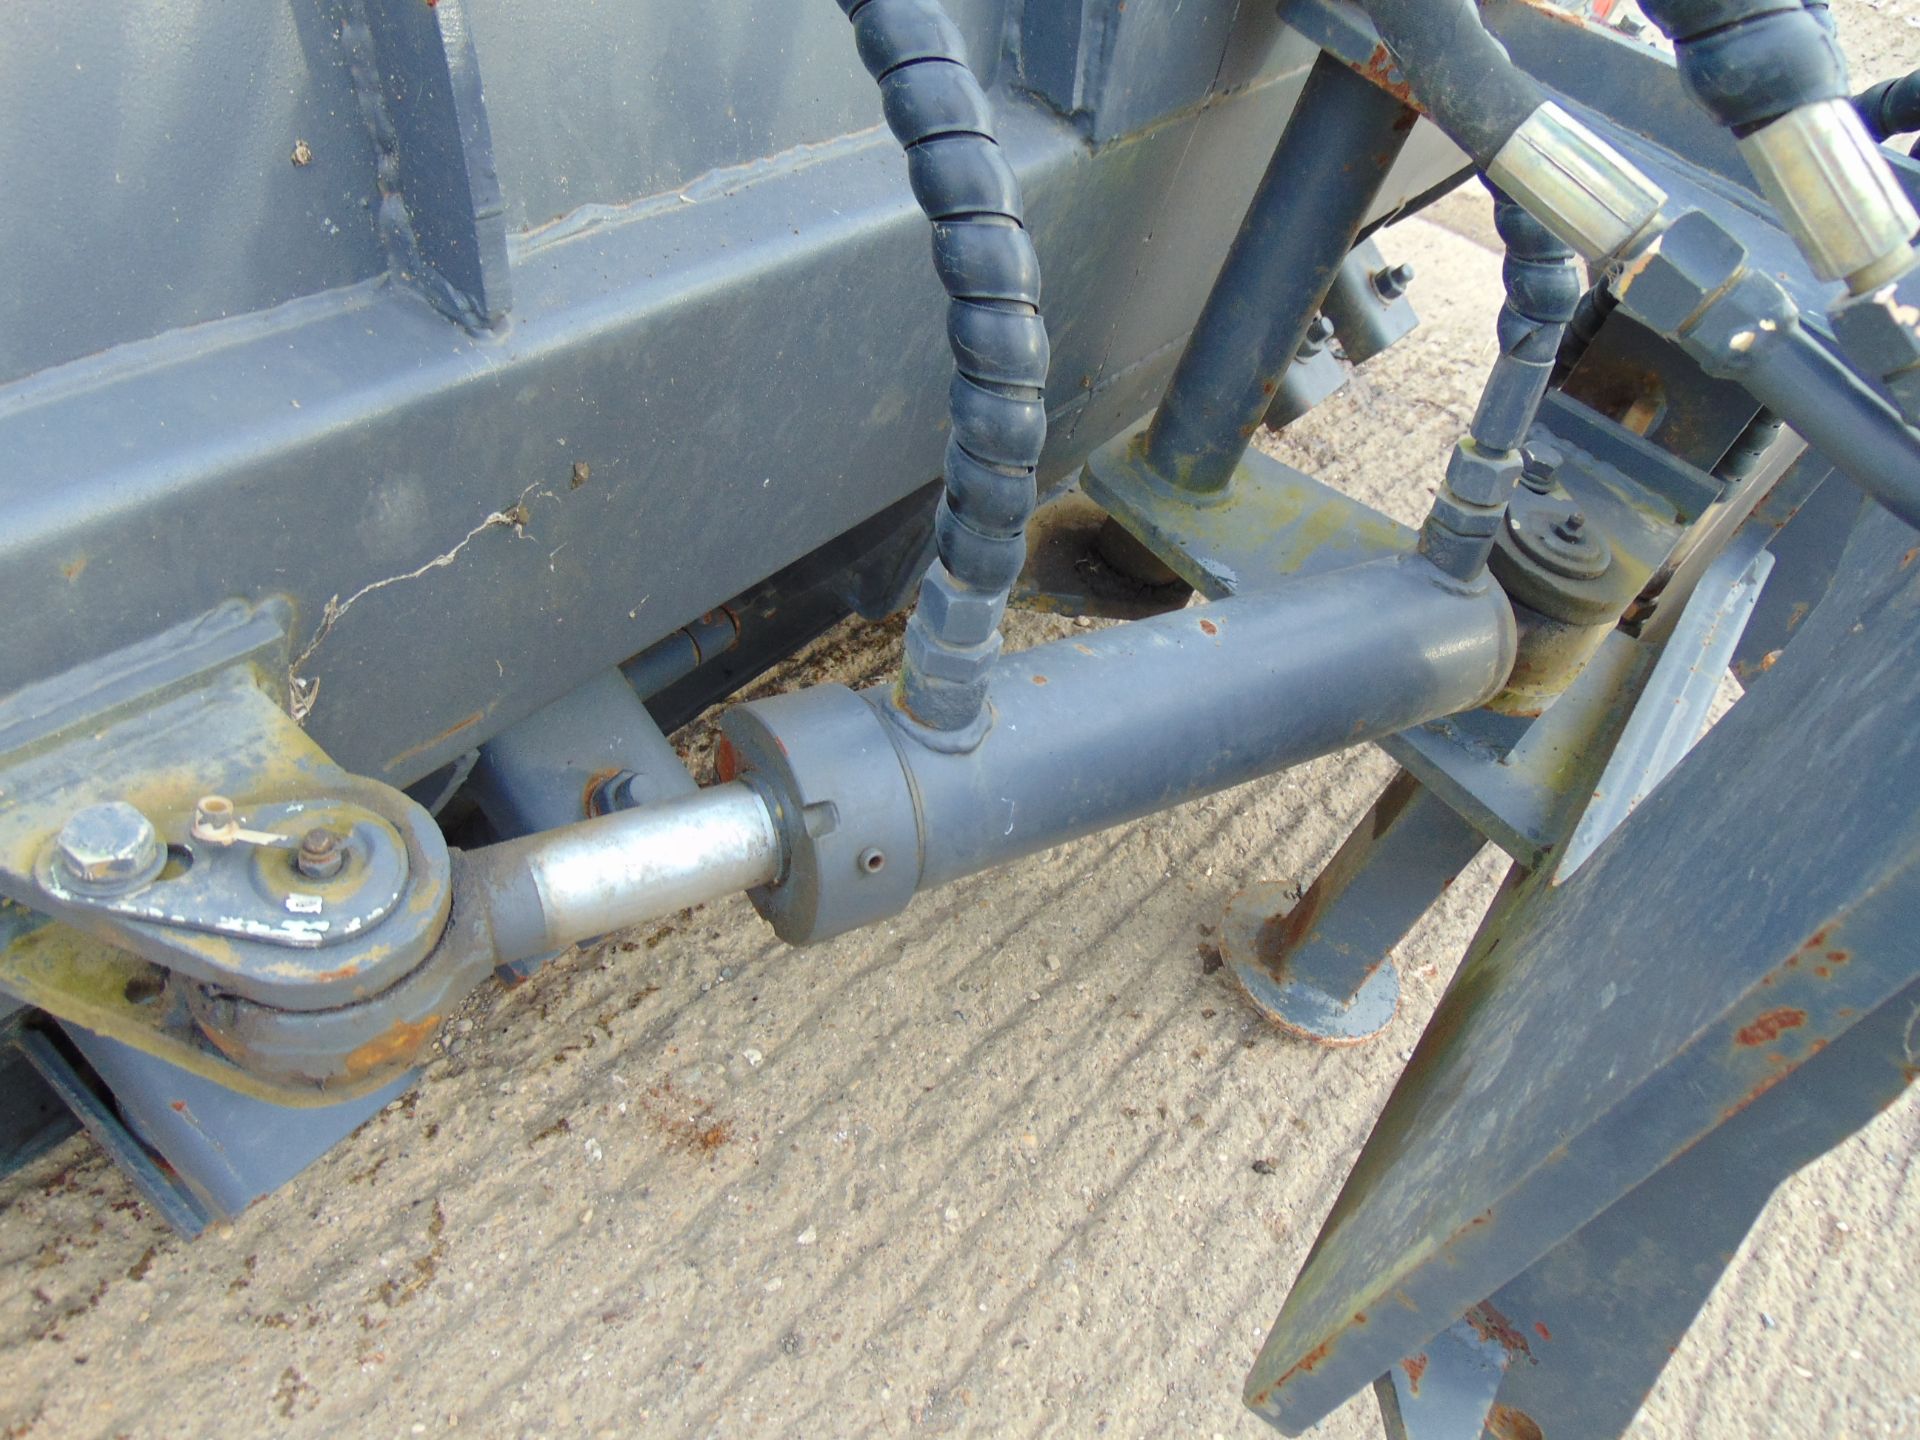 6' Hydraulic Snow Plough Blade for Telehandler, Forklift, Tractor Etc - Image 6 of 7